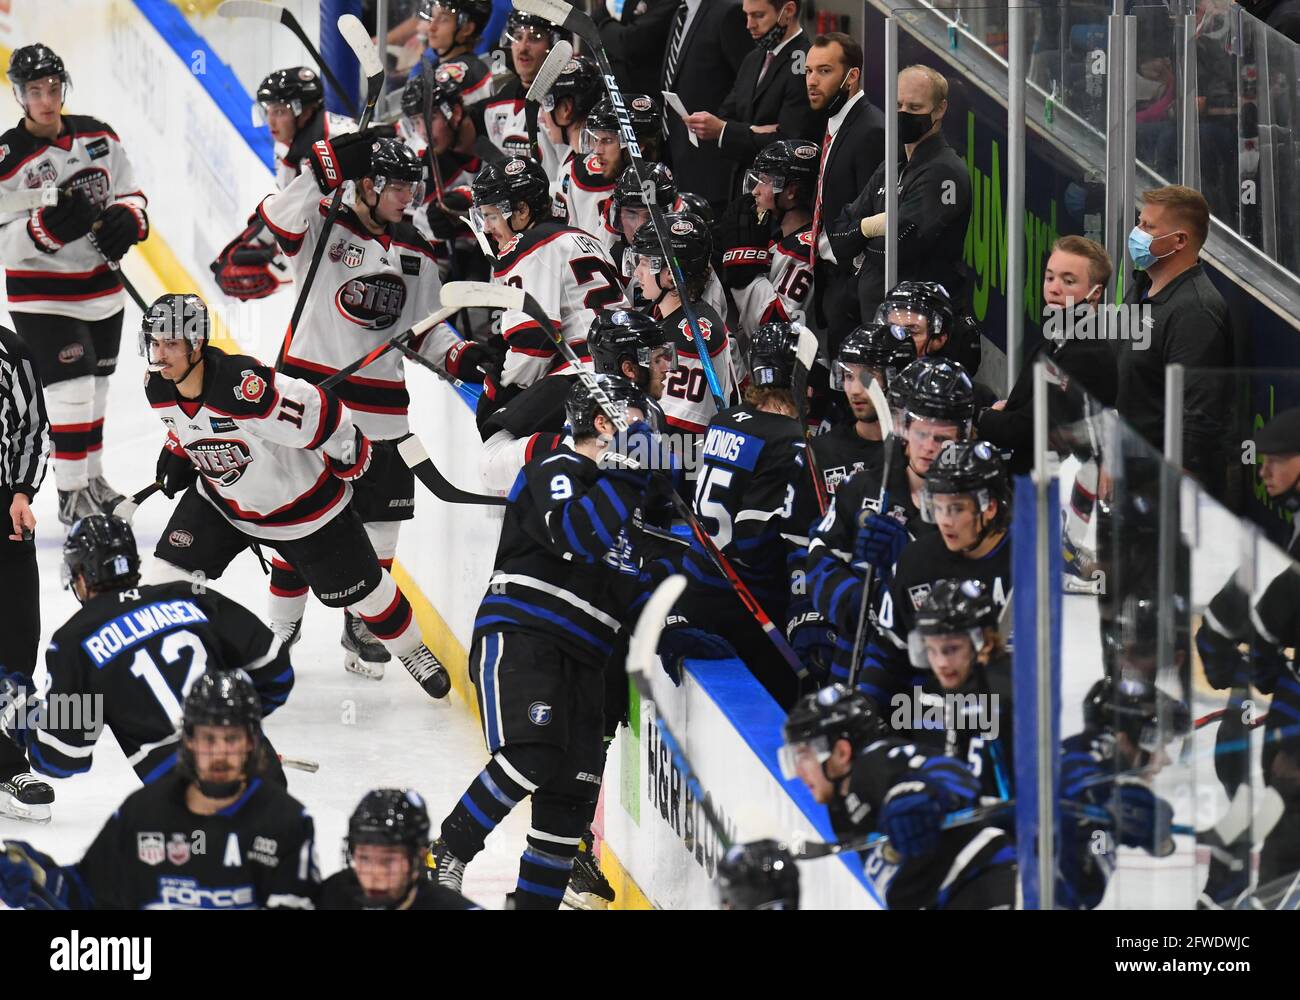 May 21, 2021: Both teams change players during game three of the Clark Cup championship USHL series between the Chicago Steel and the Fargo Force at Scheels Arena in Fargo, ND. Chicago won 7-1 and takes a two games to one lead in the five game series. Photo by Russell Hons/CSM Stock Photo